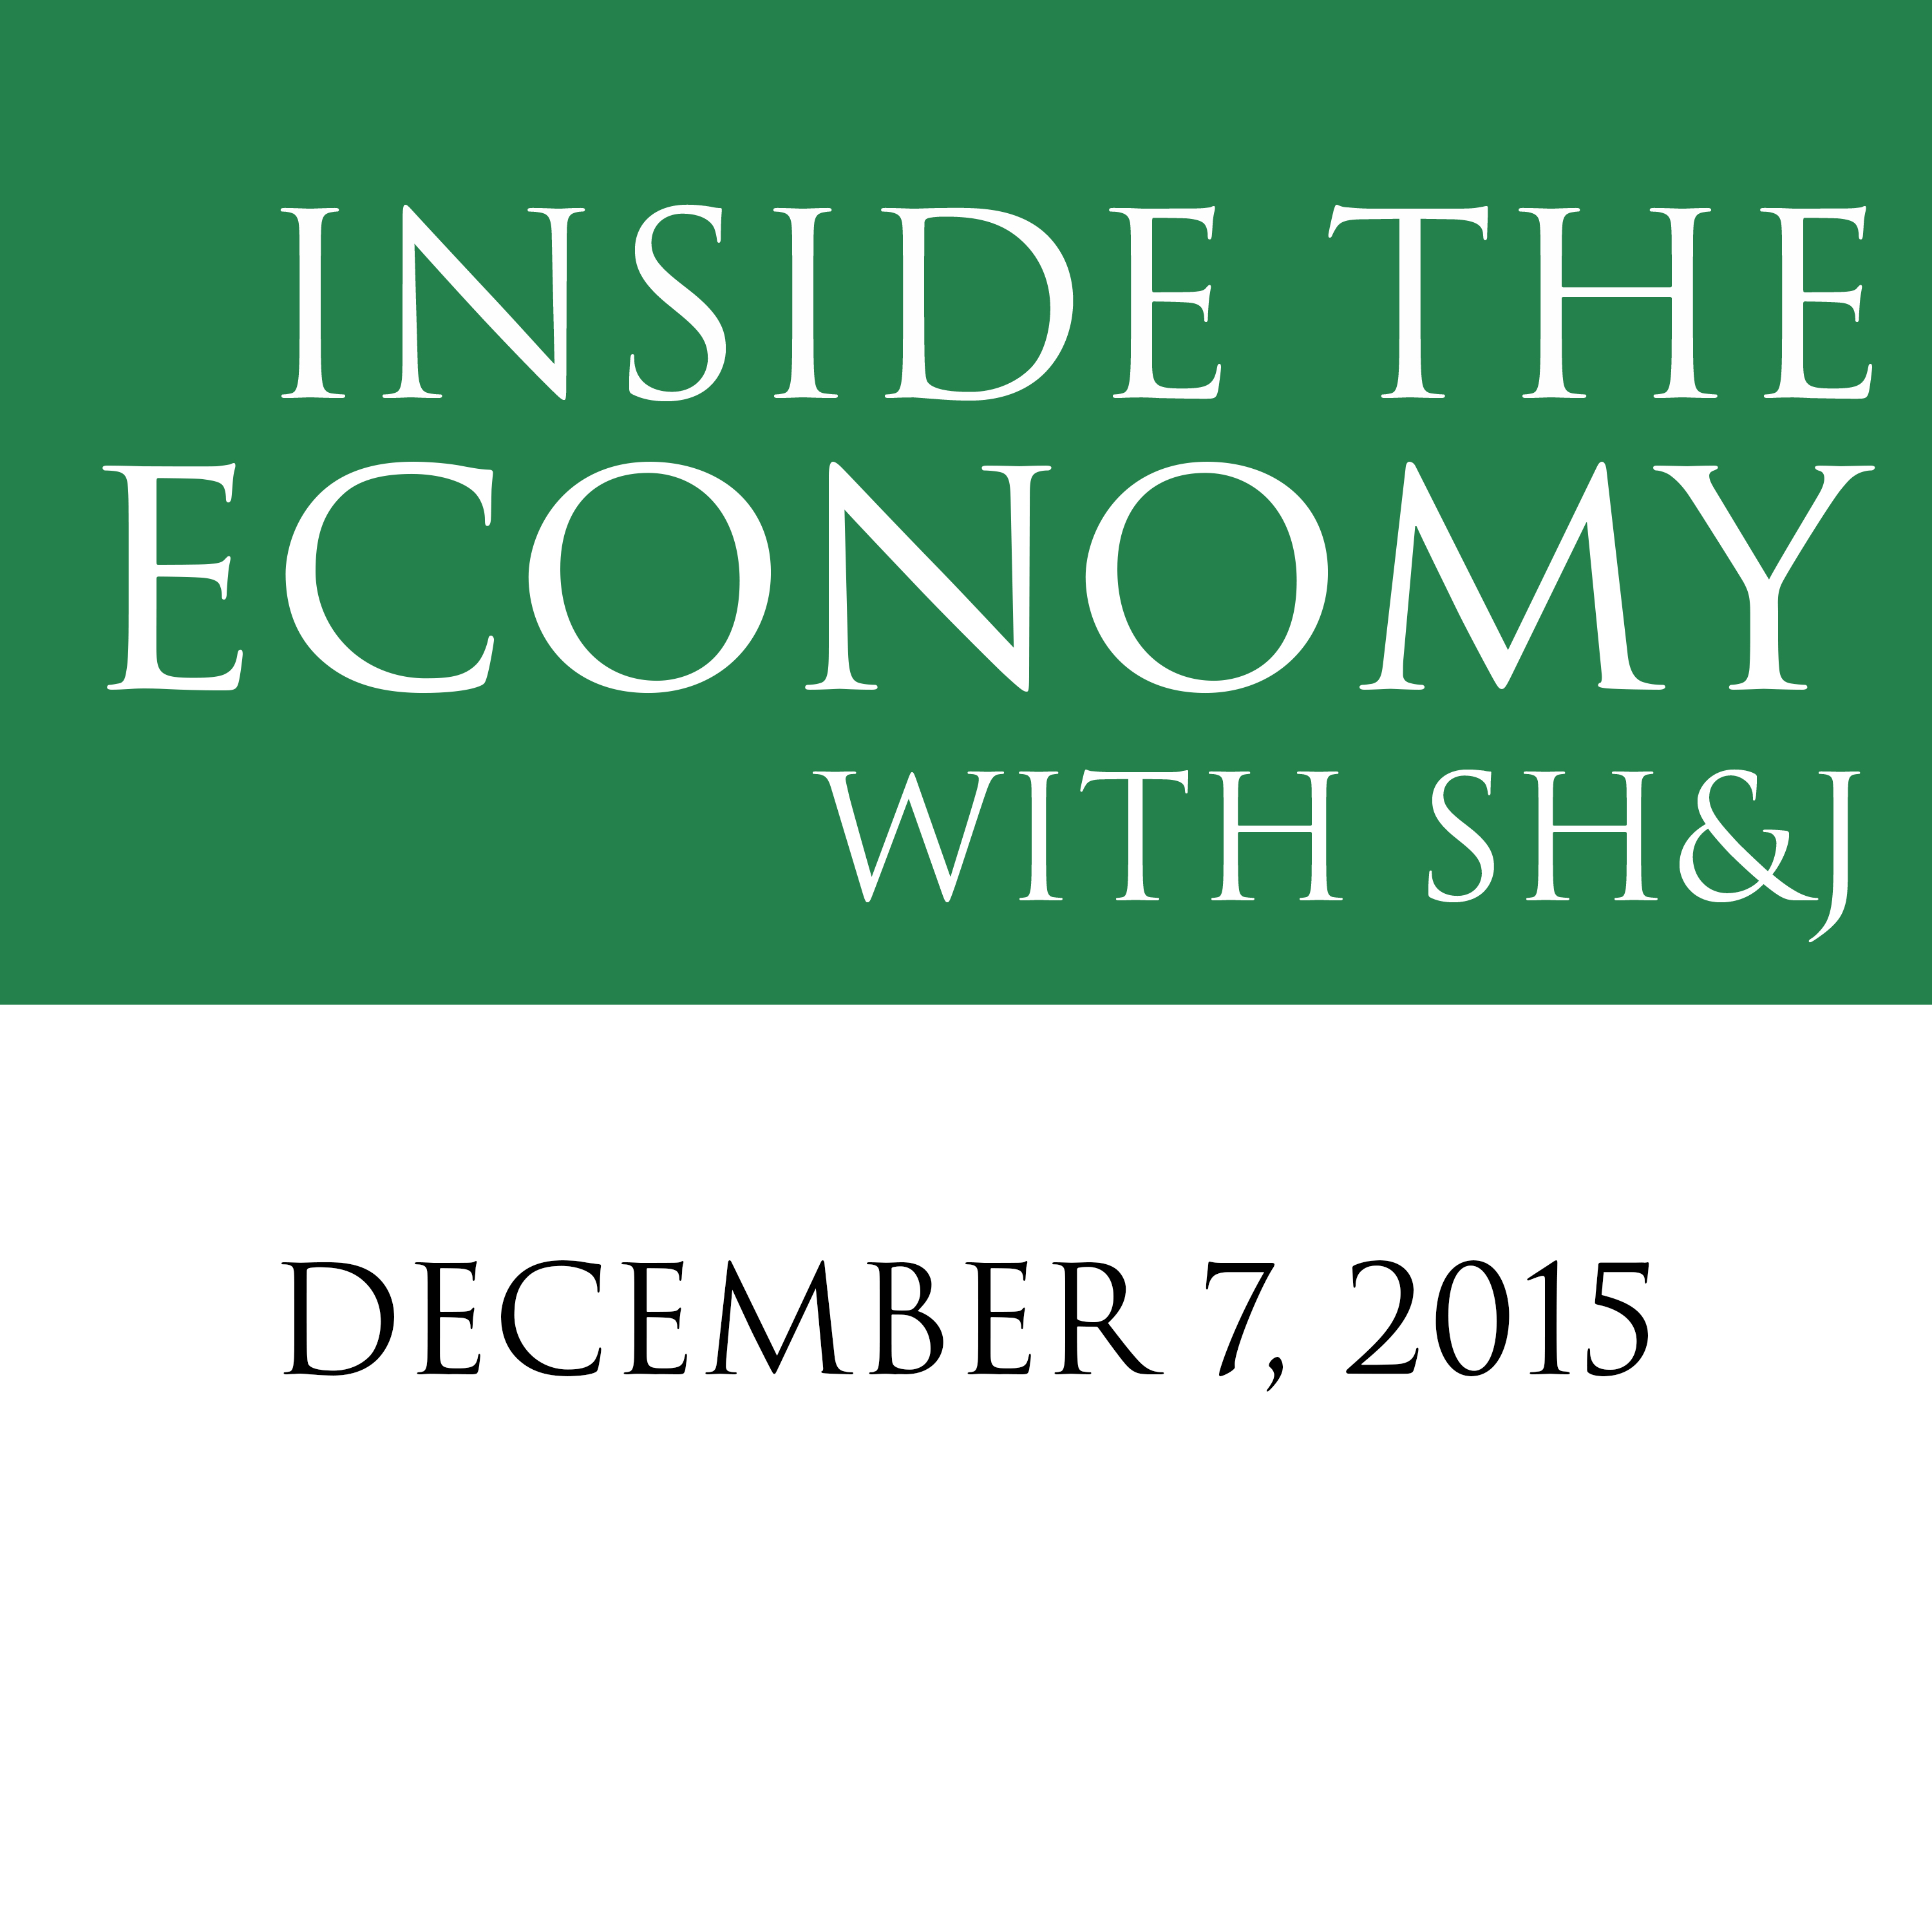 December 7, 2015  --  Inside the Economy with SH&J